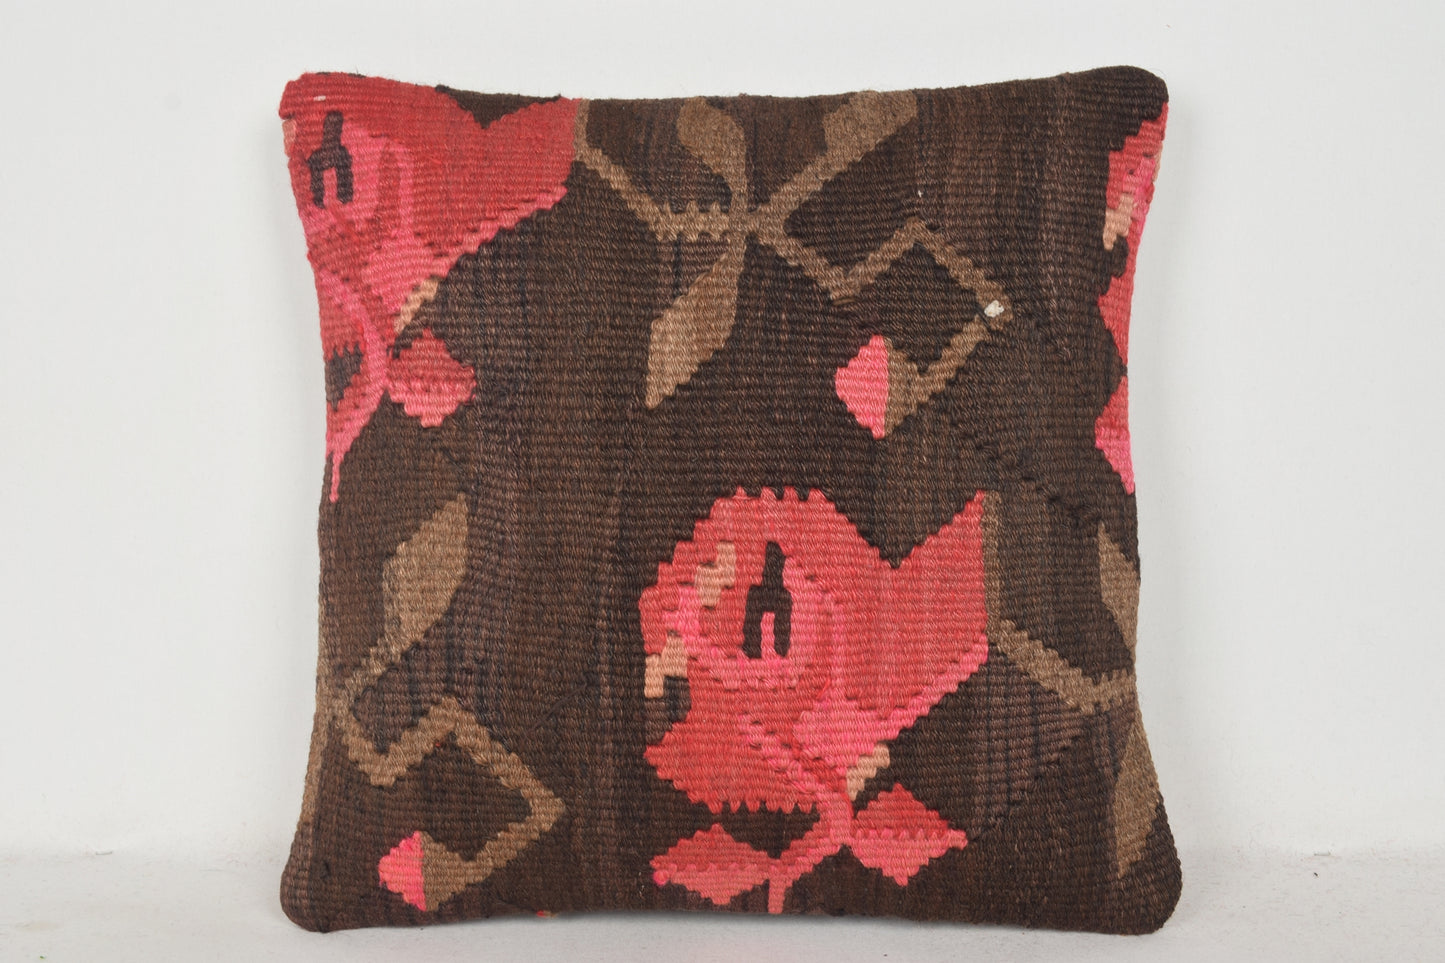 Brown Coral Pink Turkish Throw Pillow Covers C00405 18x18 " - 45x45 cm.